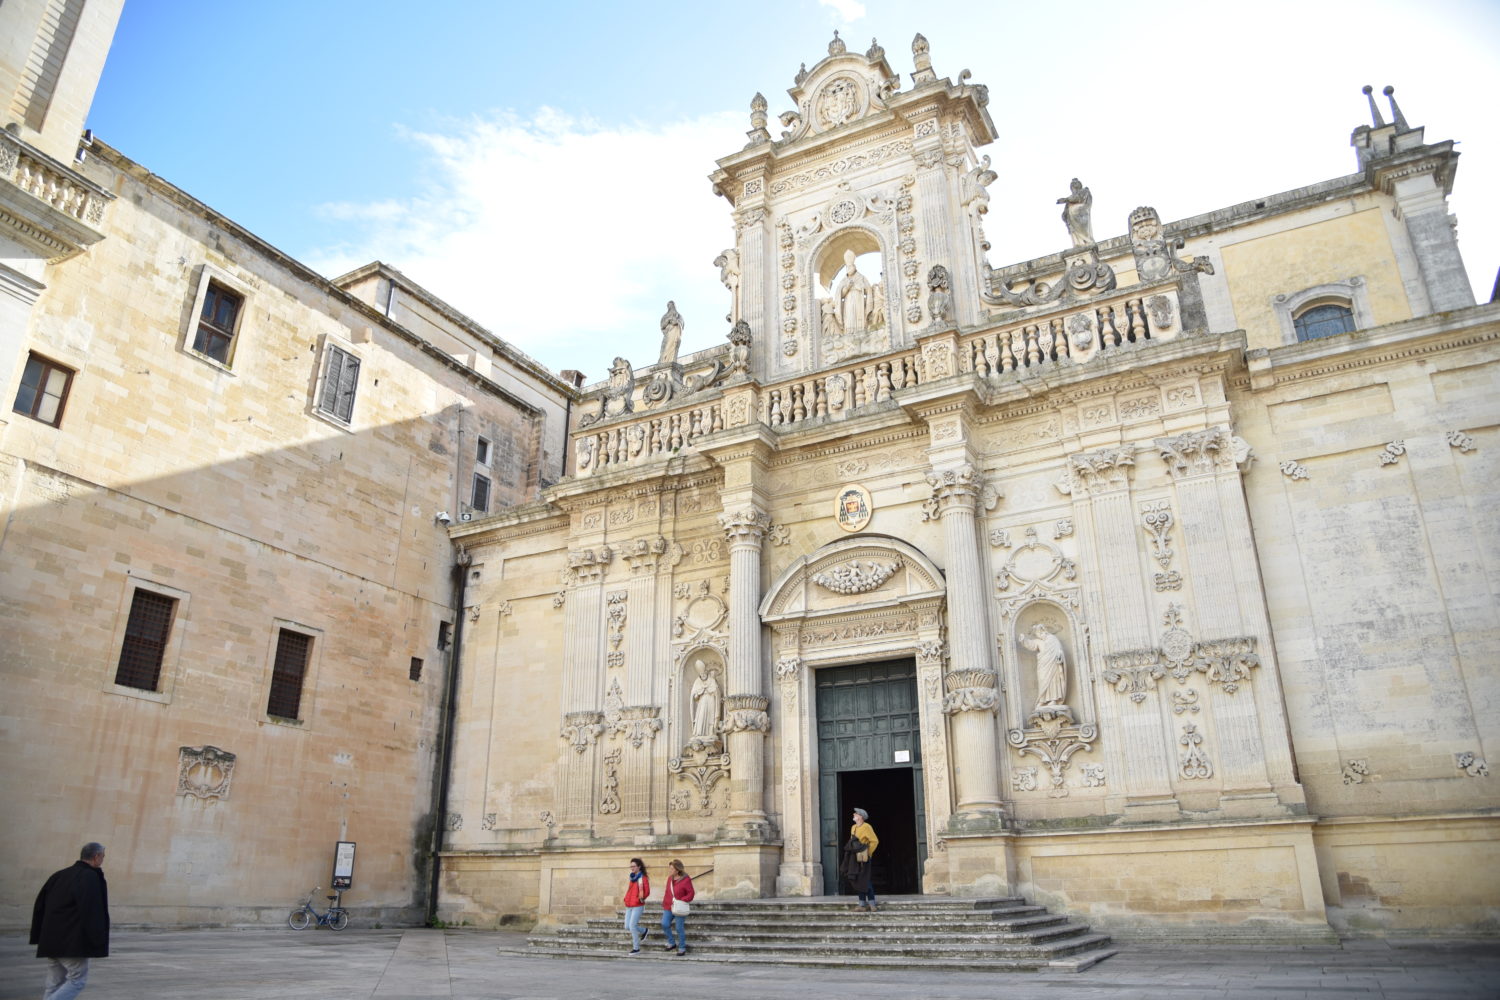 Astounding architecture and historical sites on this Puglia bike tour